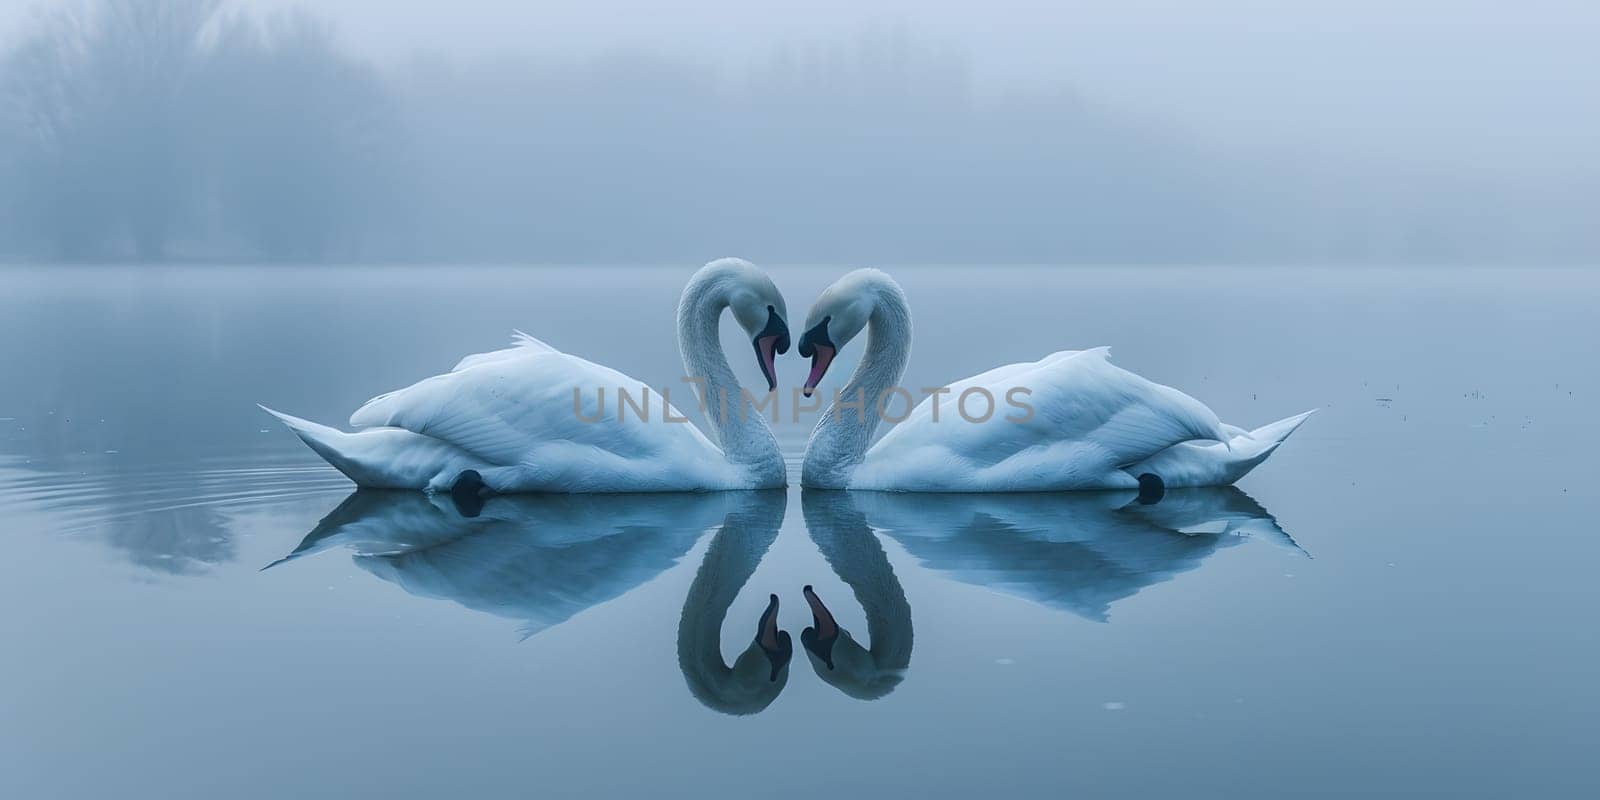 Two swans on a lake creating a heart shape with their necks, displaying a beautiful gesture of love and symmetry in the water